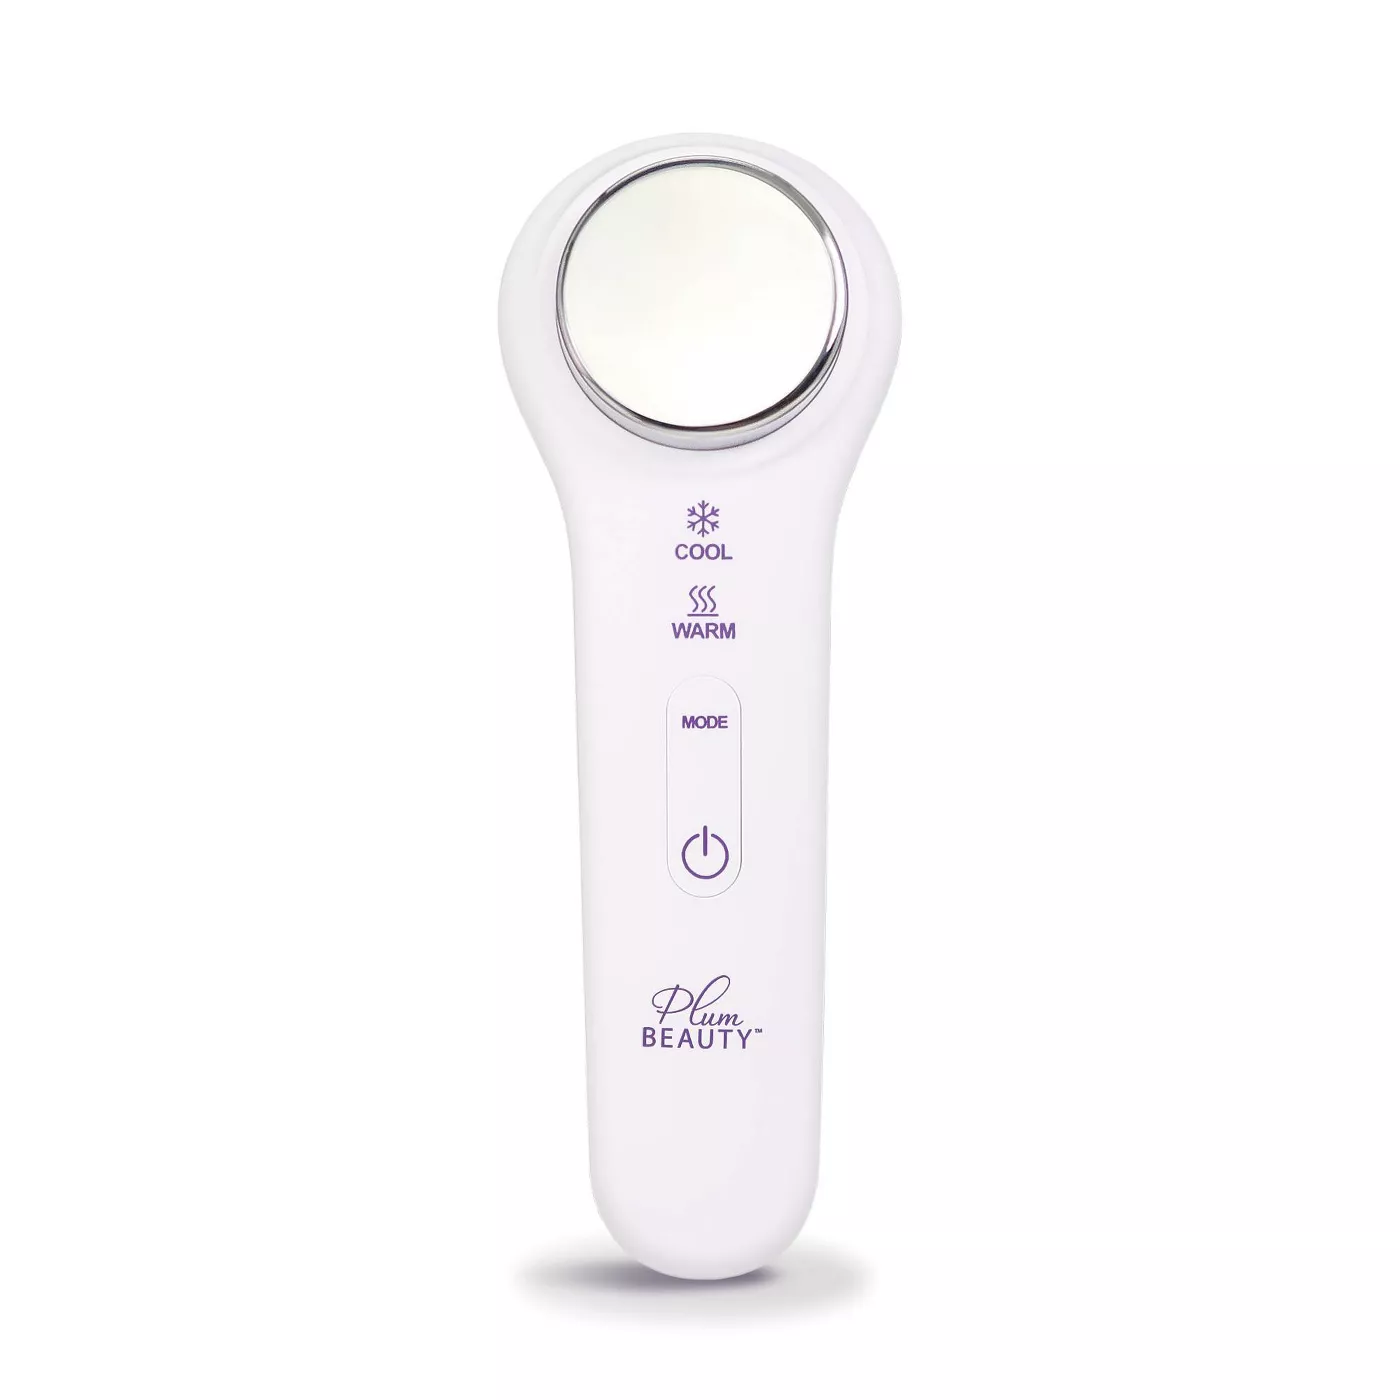 Plum Beauty Hot & Cold Facial Massager - 1ct - image 1 of 5